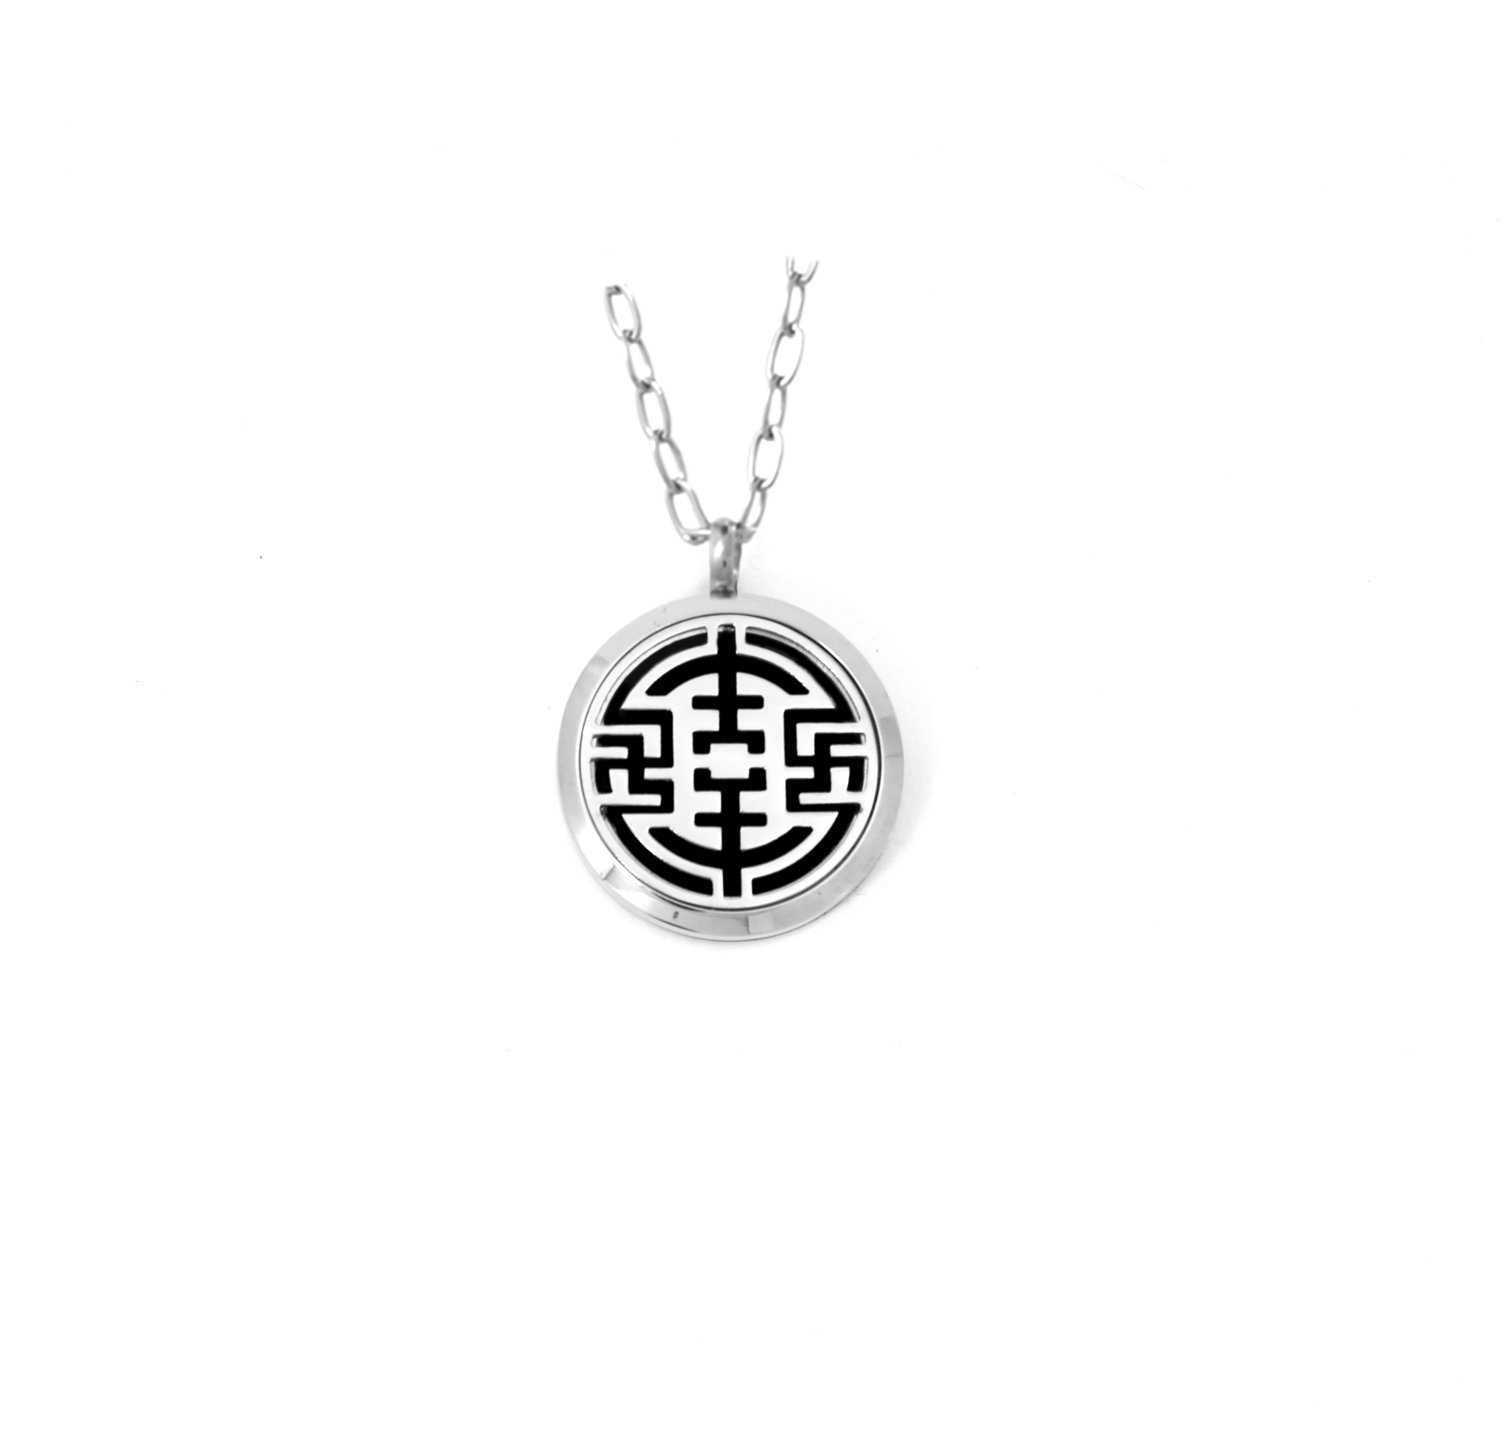 Diffusing Magnetic Geometric Maze Pendant - includes Two Leather Inserts